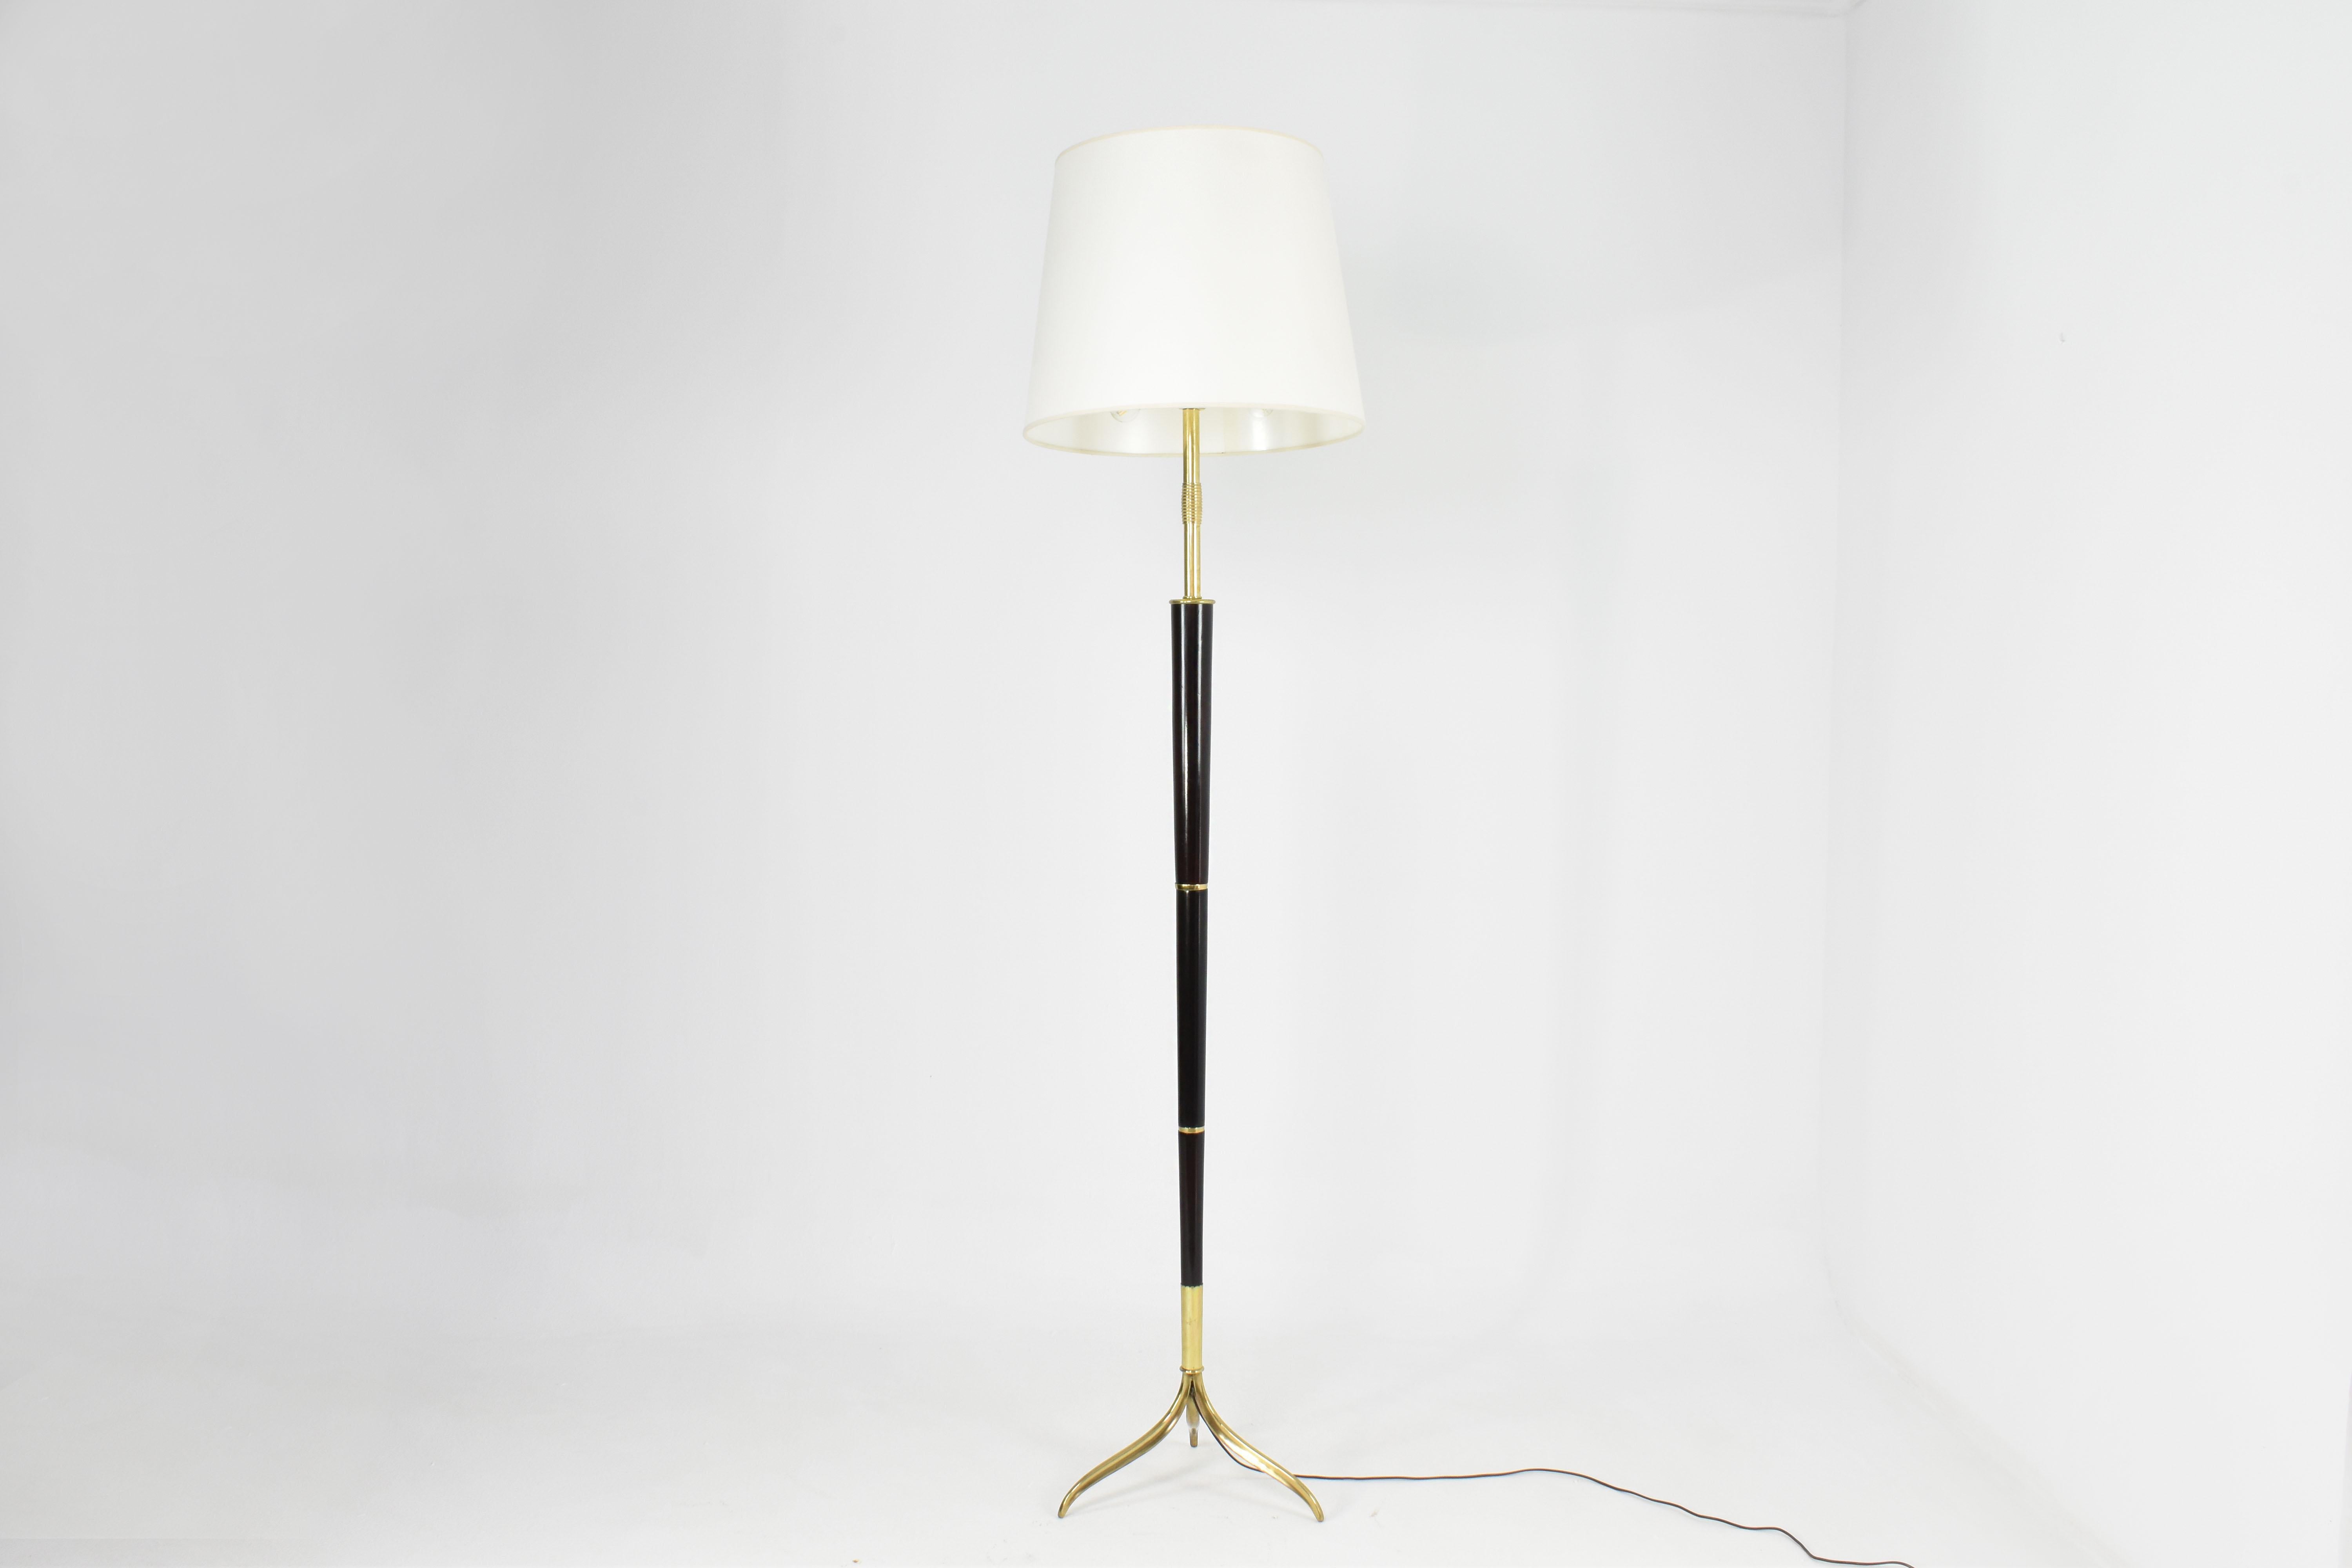 A very tall and elegant 1940s Italian vintage floor lamp designed by Giuseppe Ostuni and exceptionally handcrafted out of wood and brass. The piece stands on a sleek tripod base. The brass details combined with the warm veneer wood create an